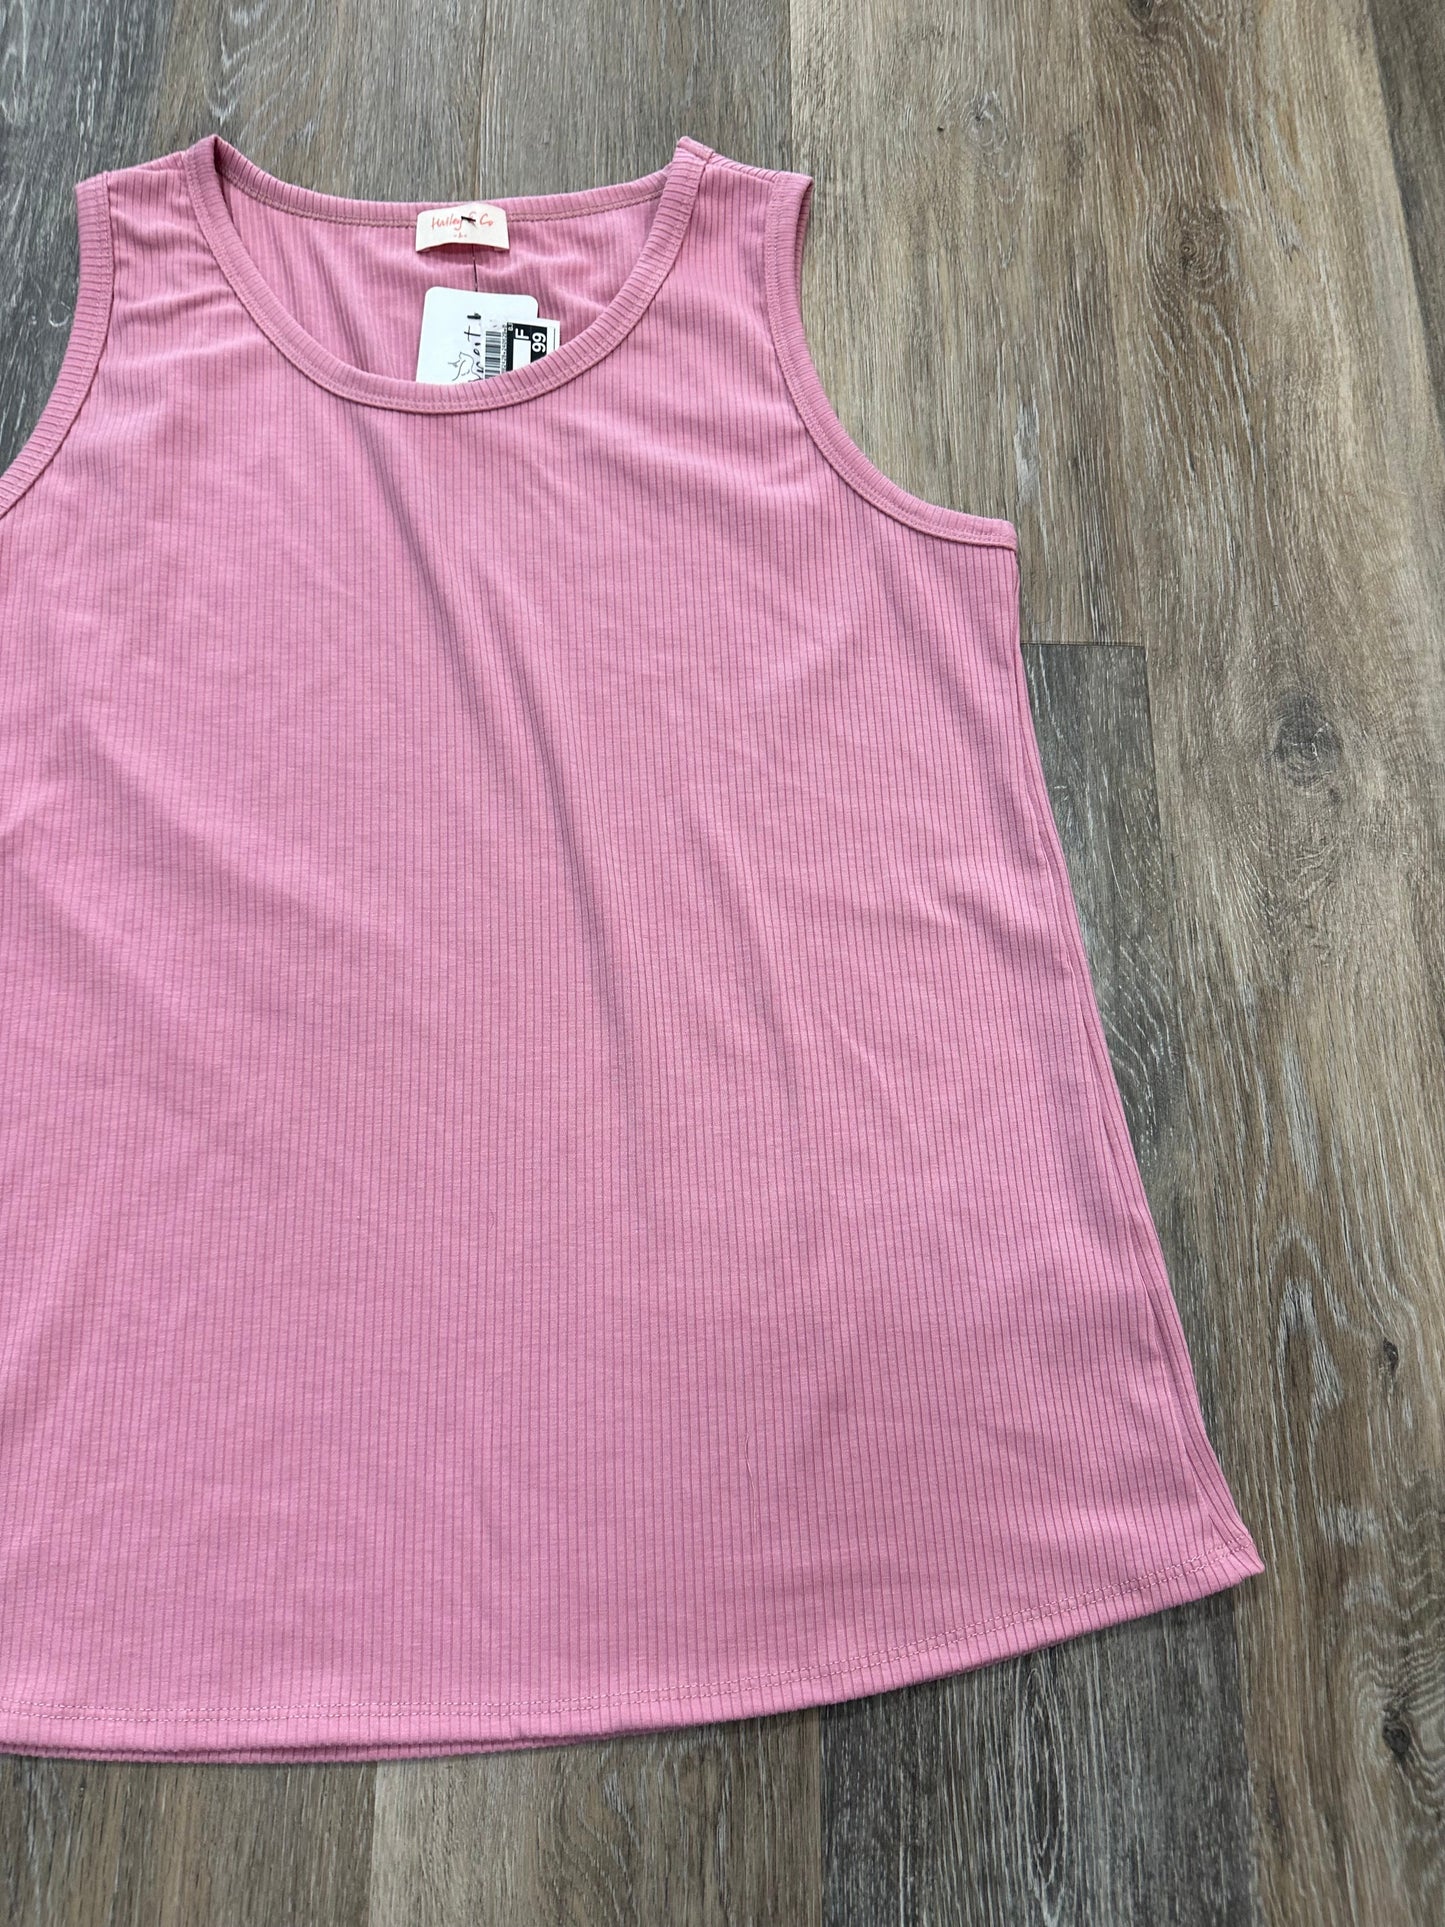 Pink Tank Top Hailey & Co. Size L